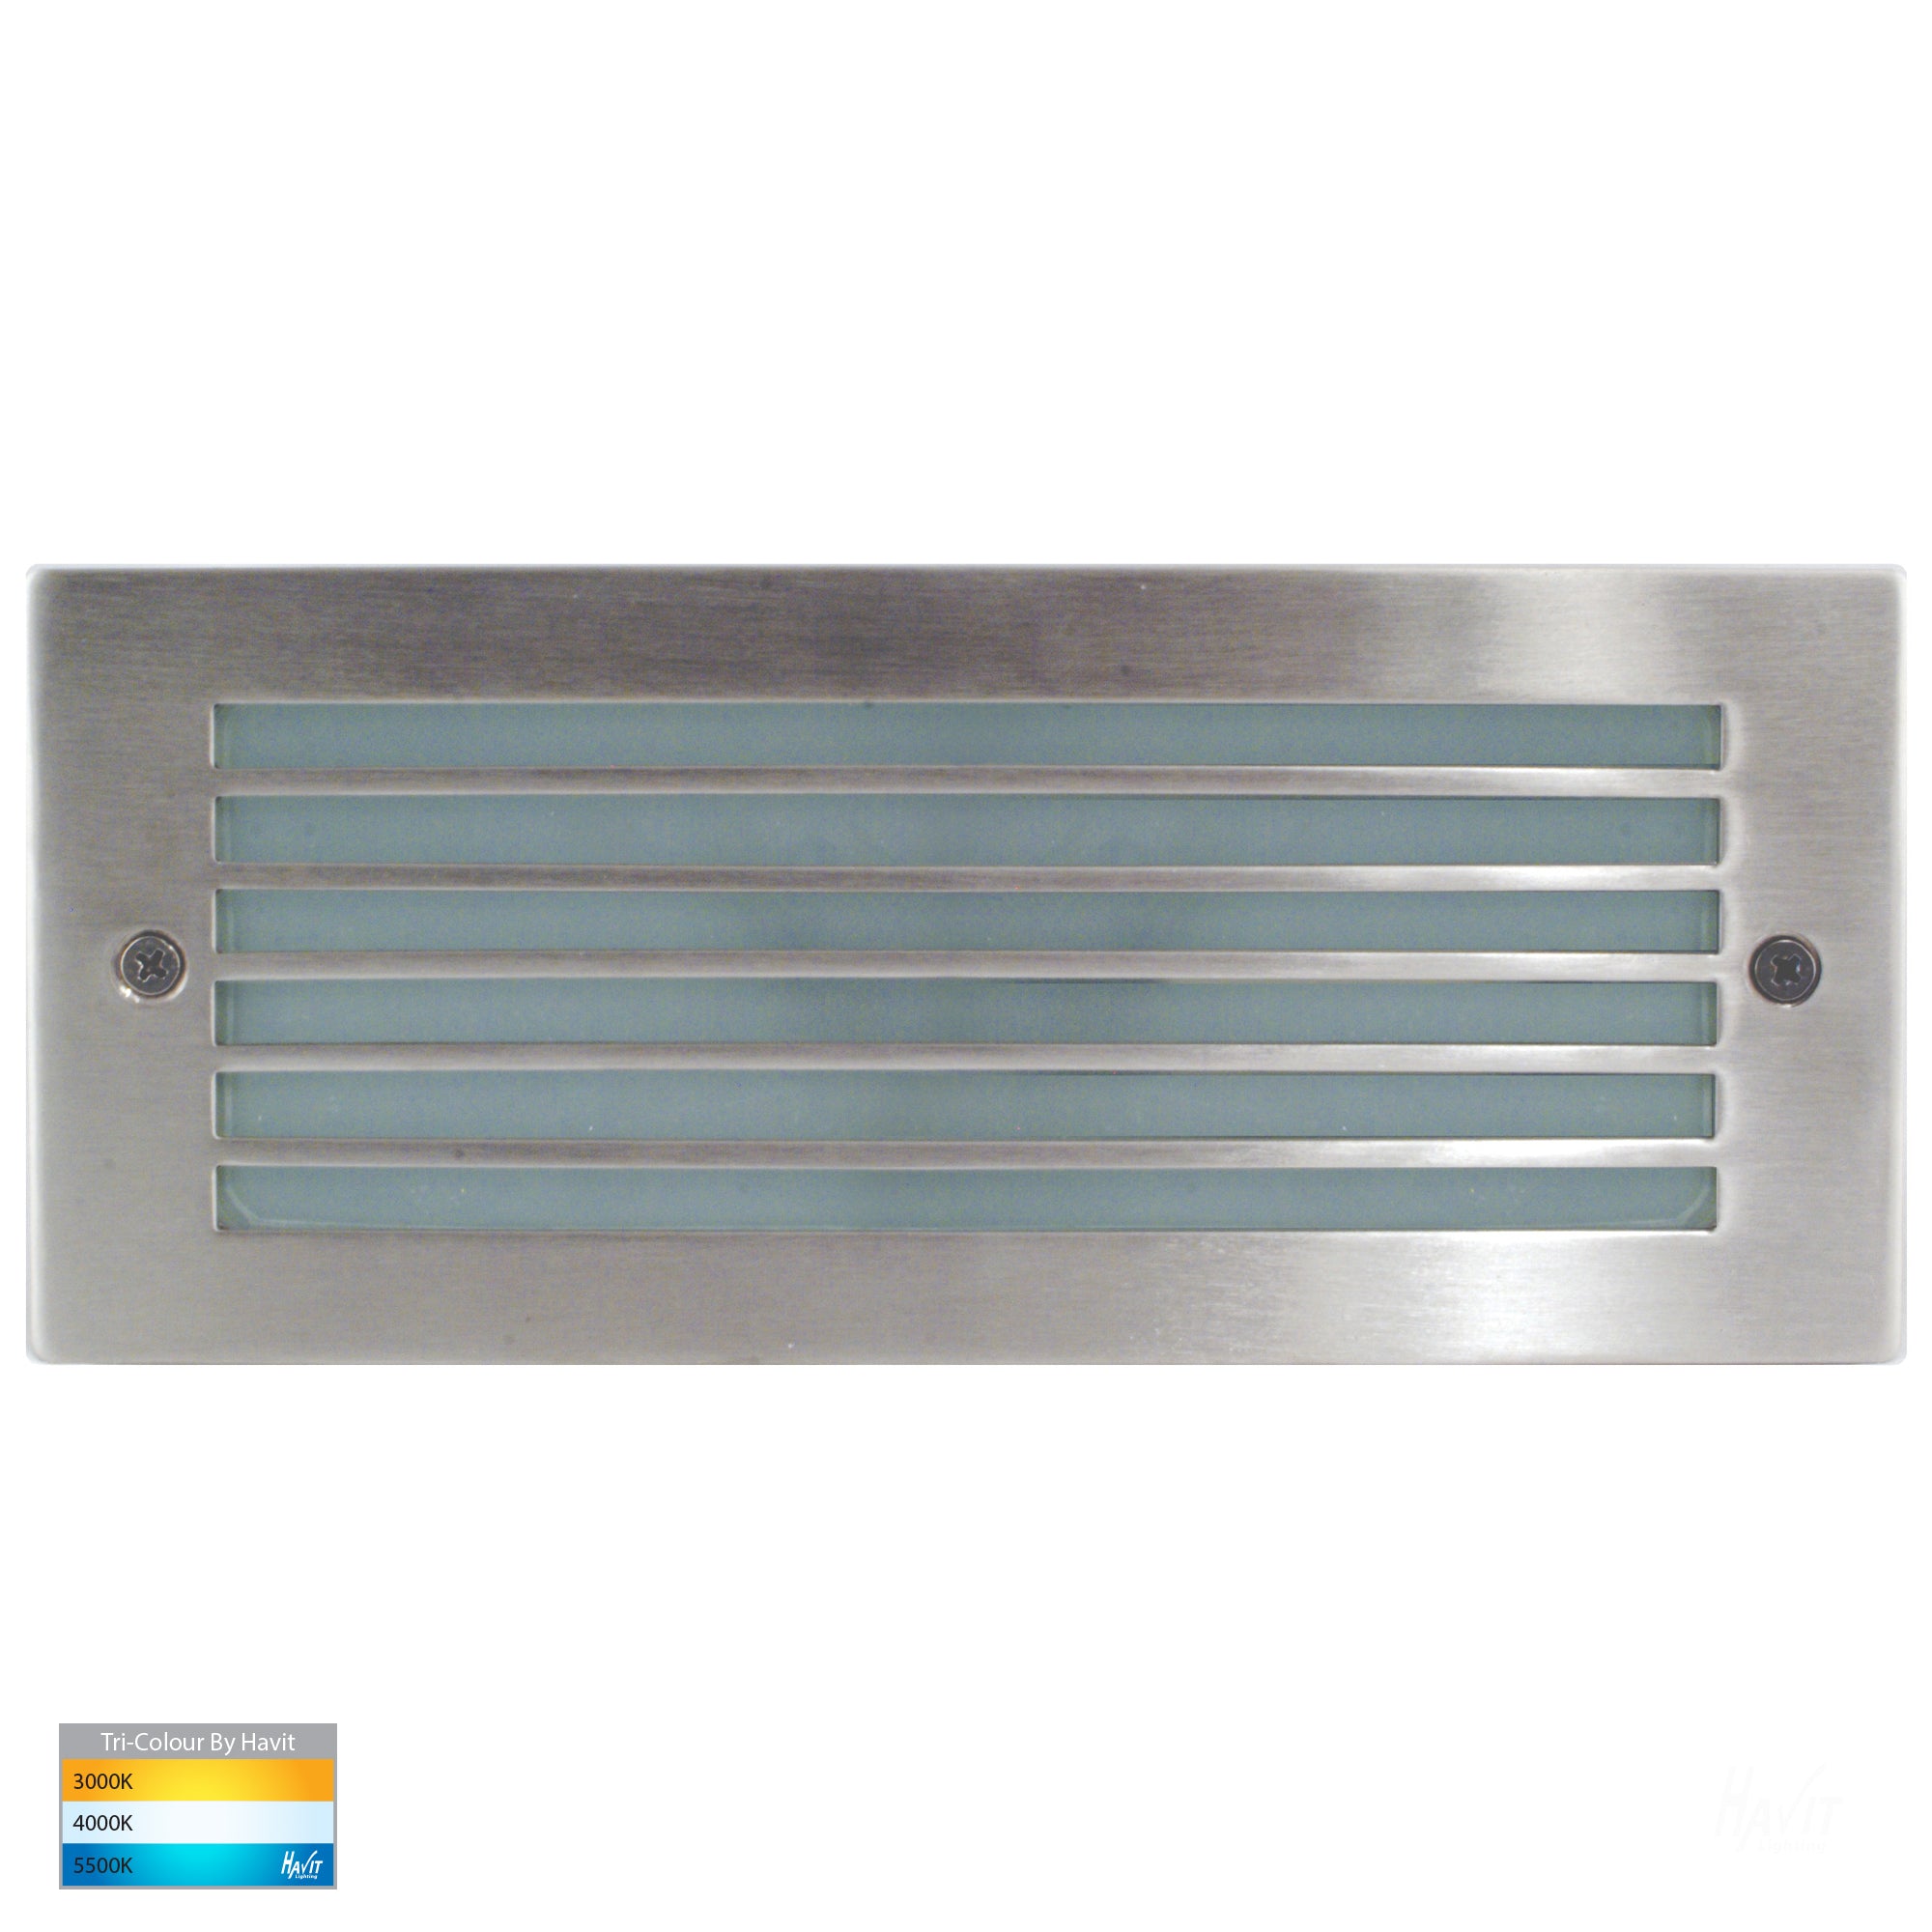 HV3004T-SS316 - Bata 316 Stainless Steel LED Brick Light with Grill